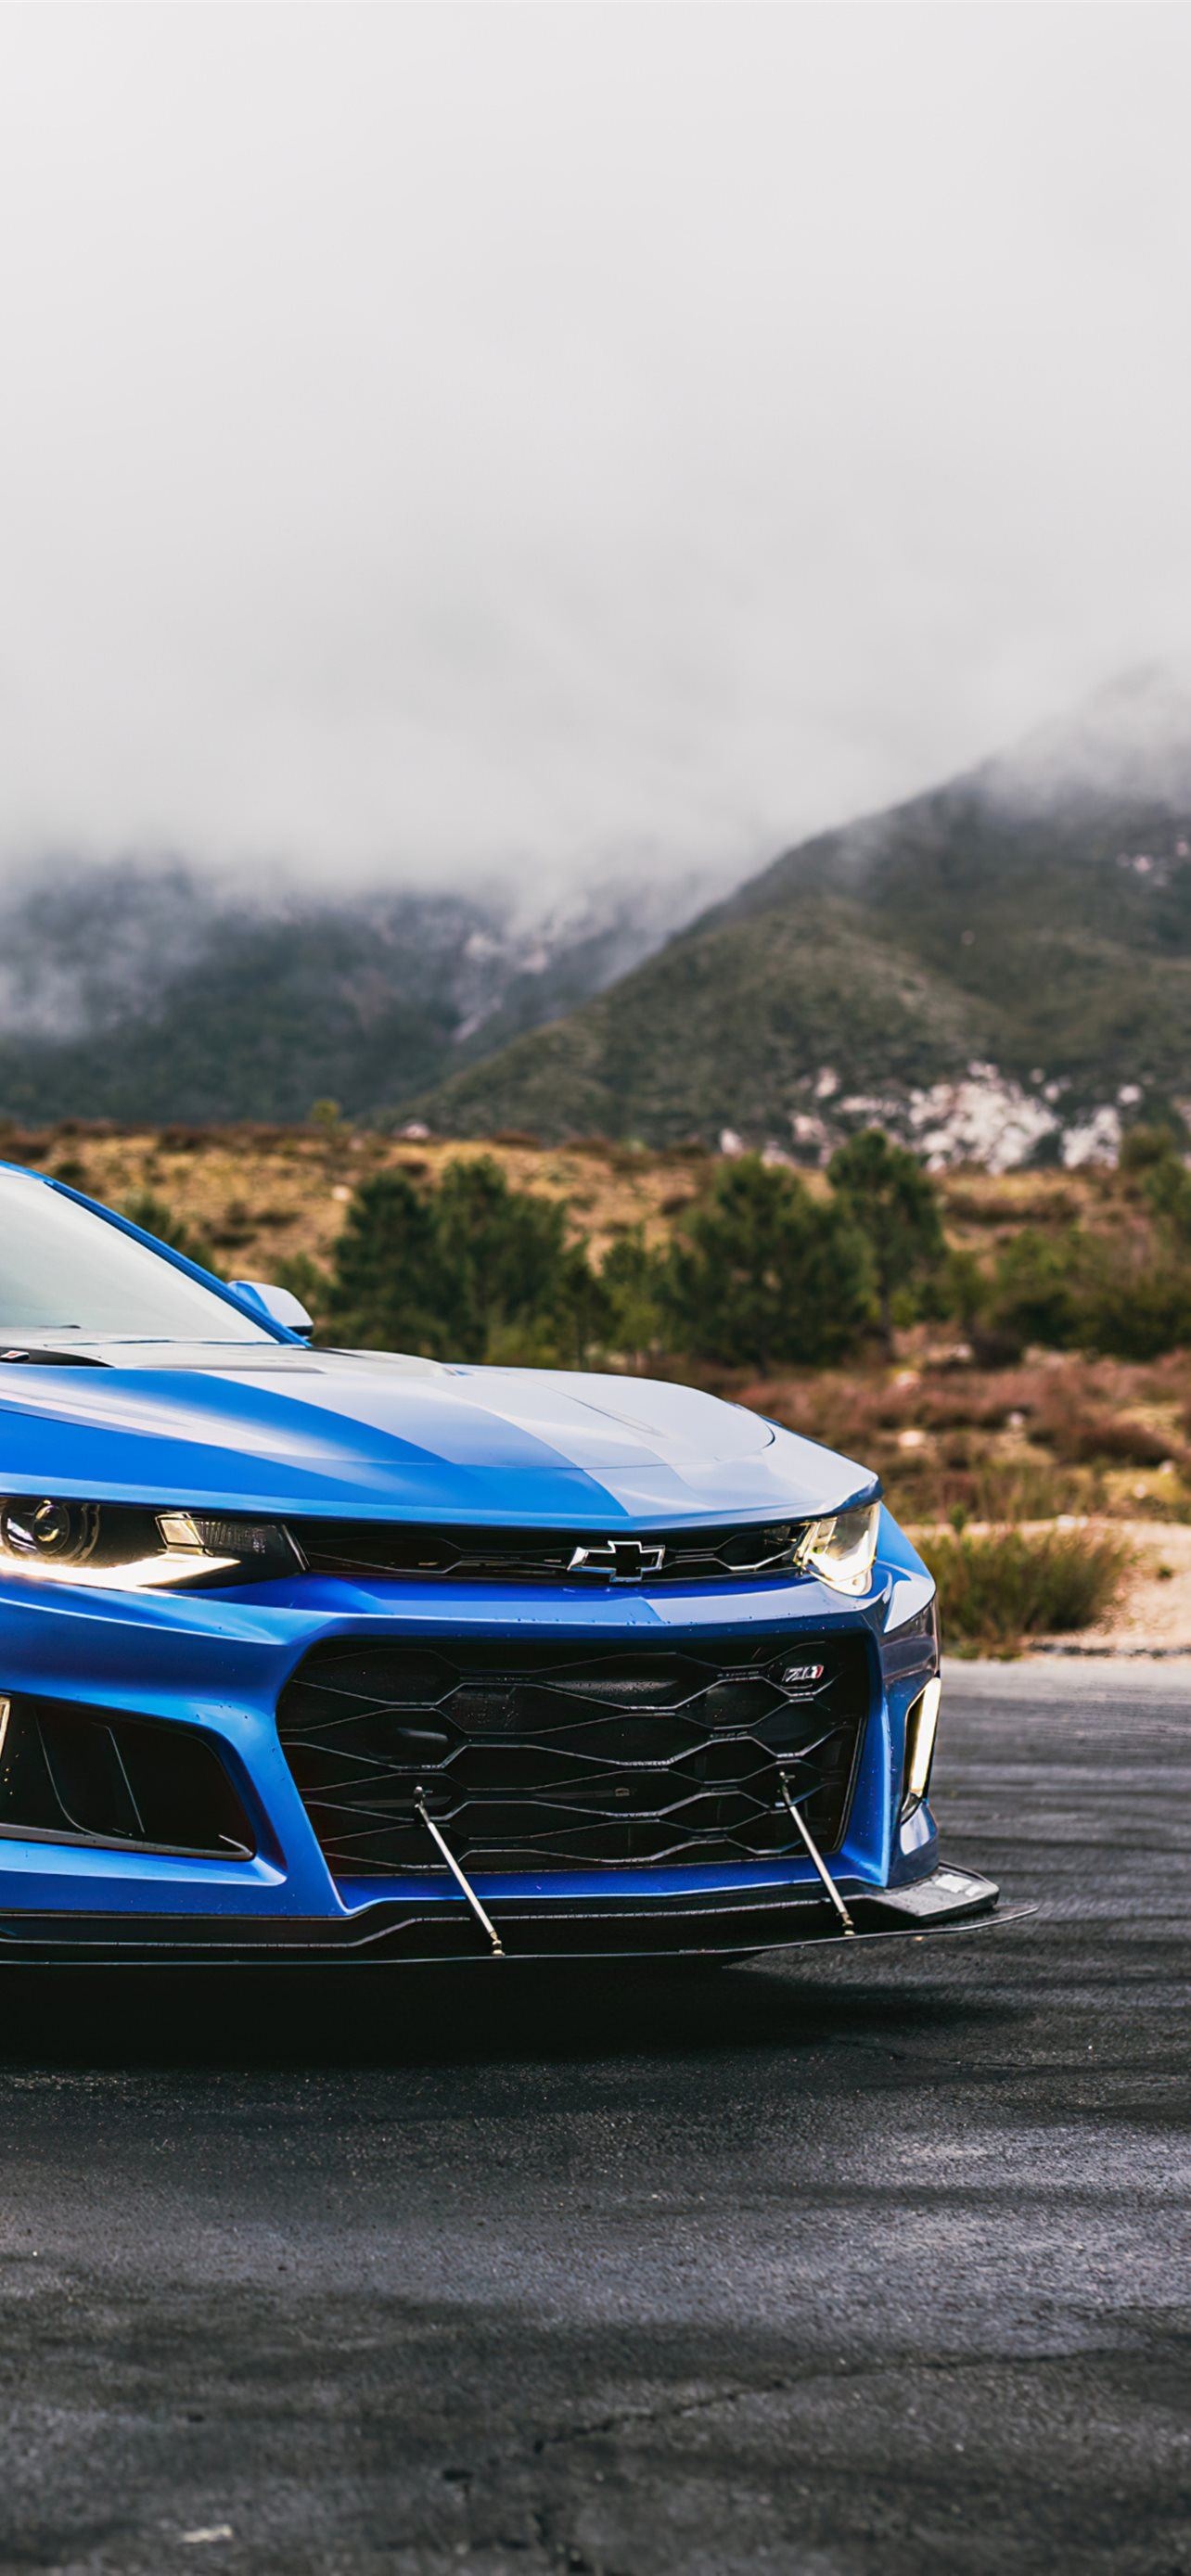 Chevrolet Camaro ZL1 iPhone wallpapers, Mobile customization, Personalize your screen, High-powered beauty, Free download, 1290x2780 HD Handy